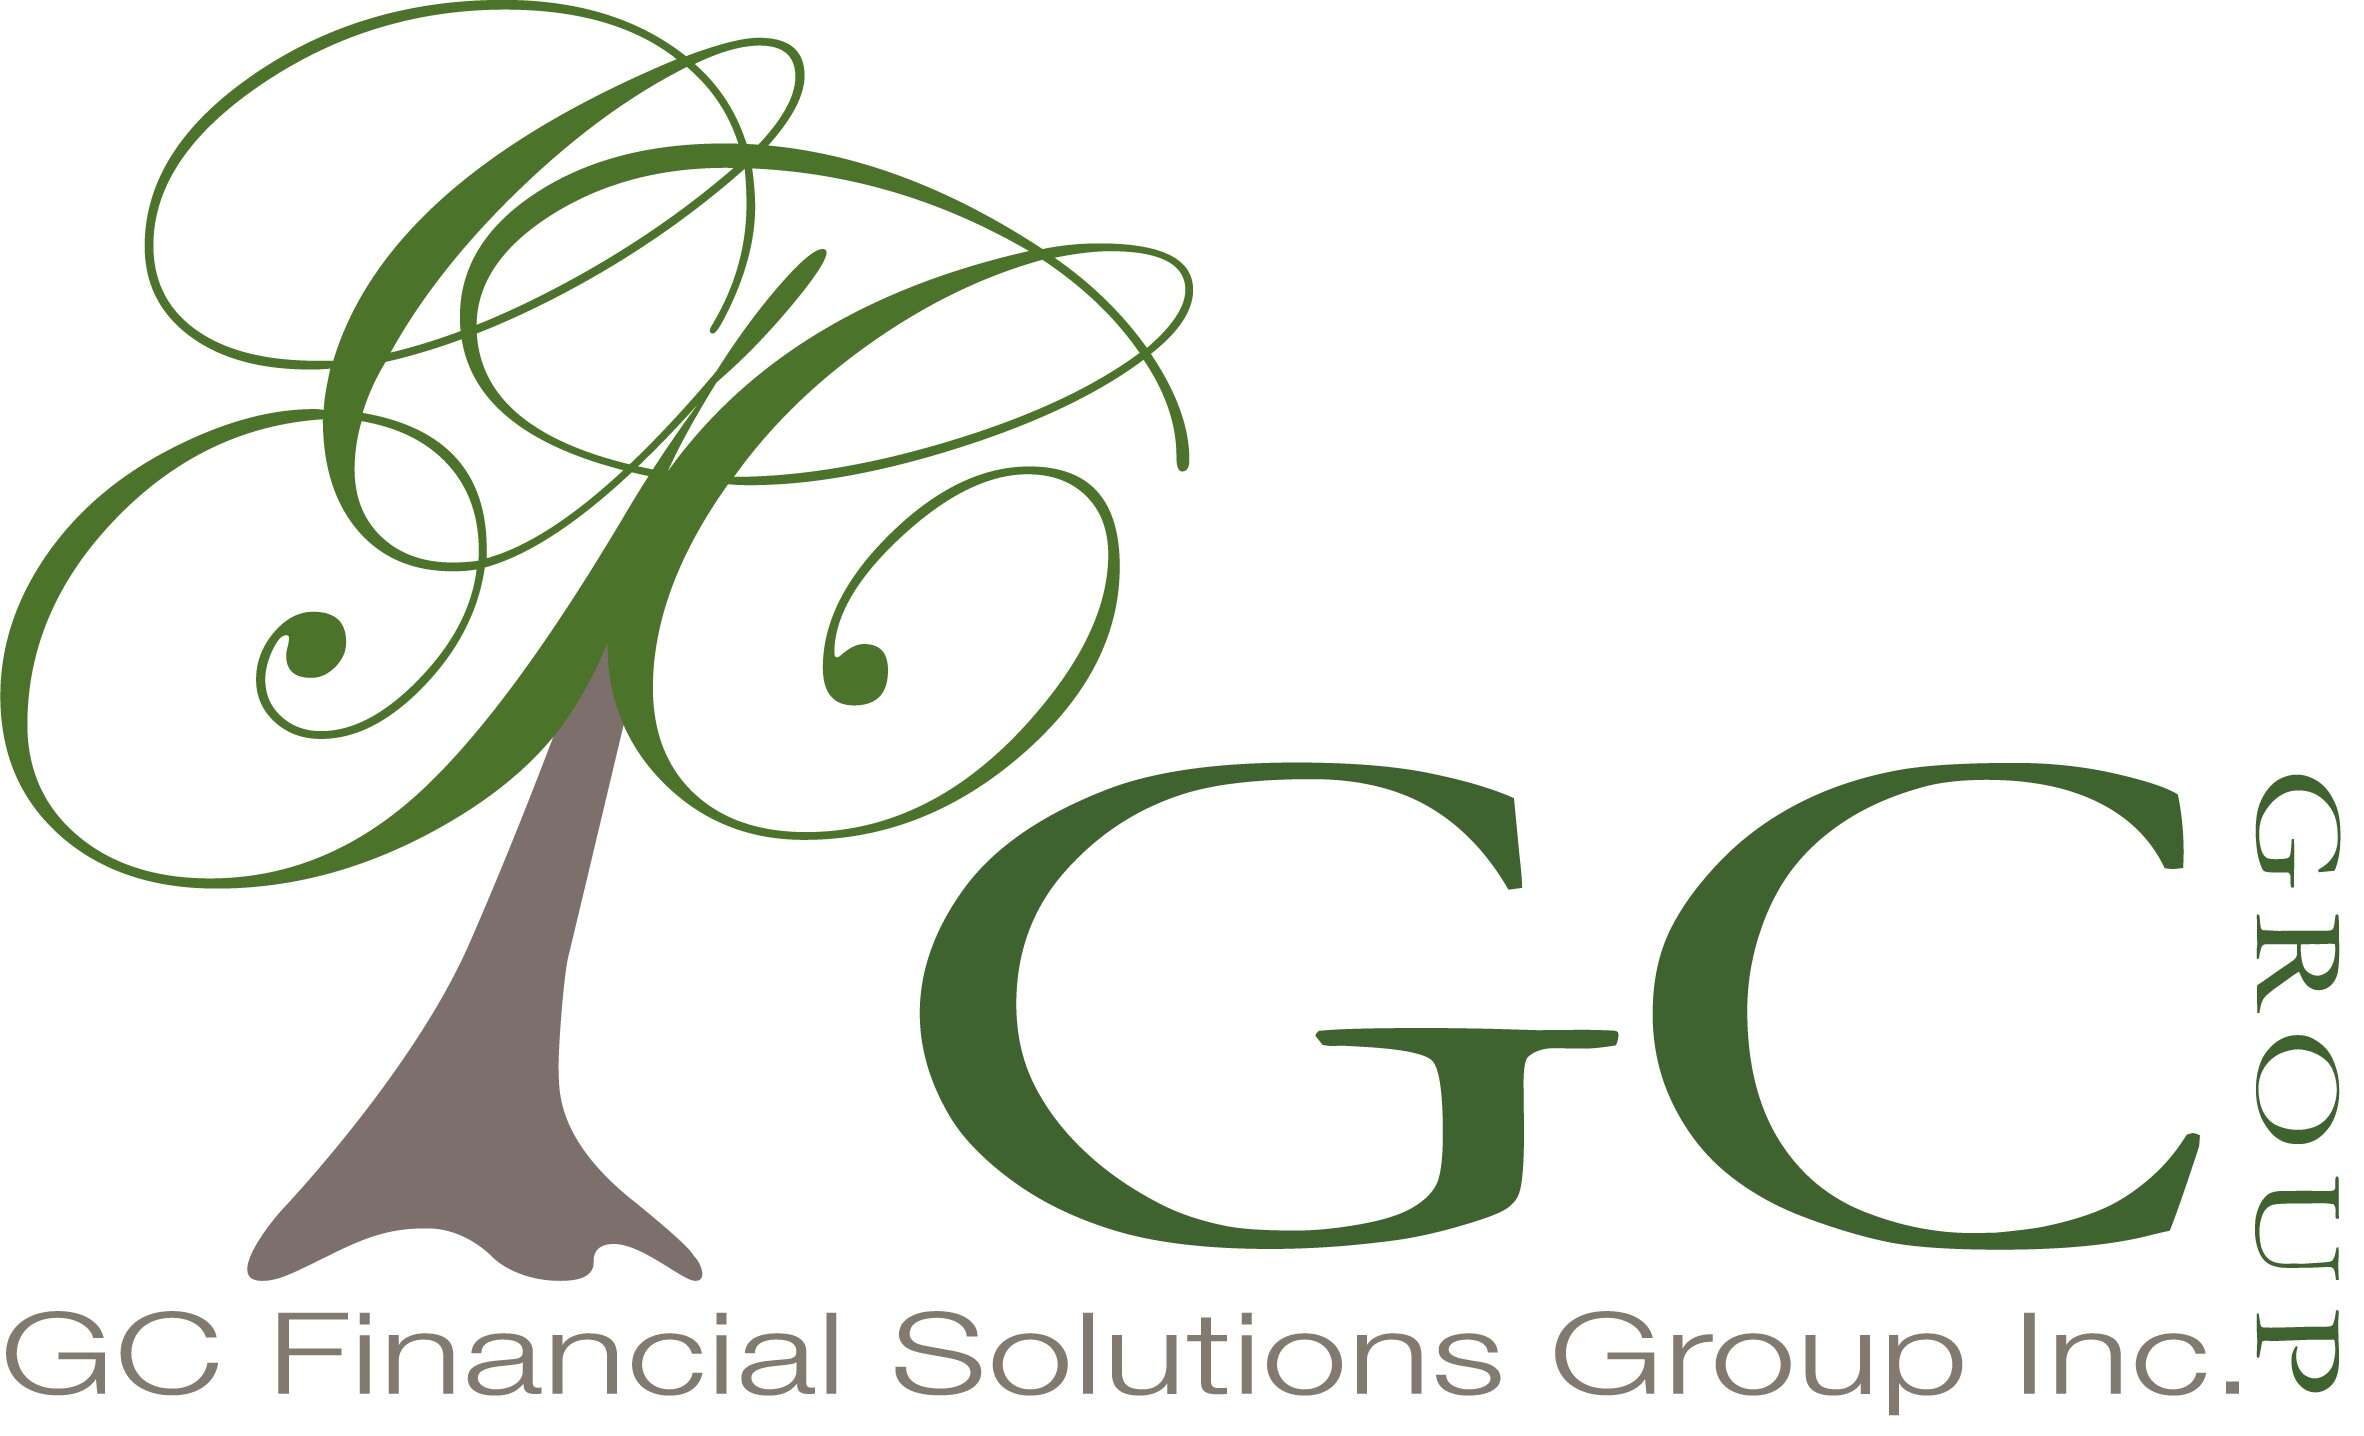 GC Financial Solutions